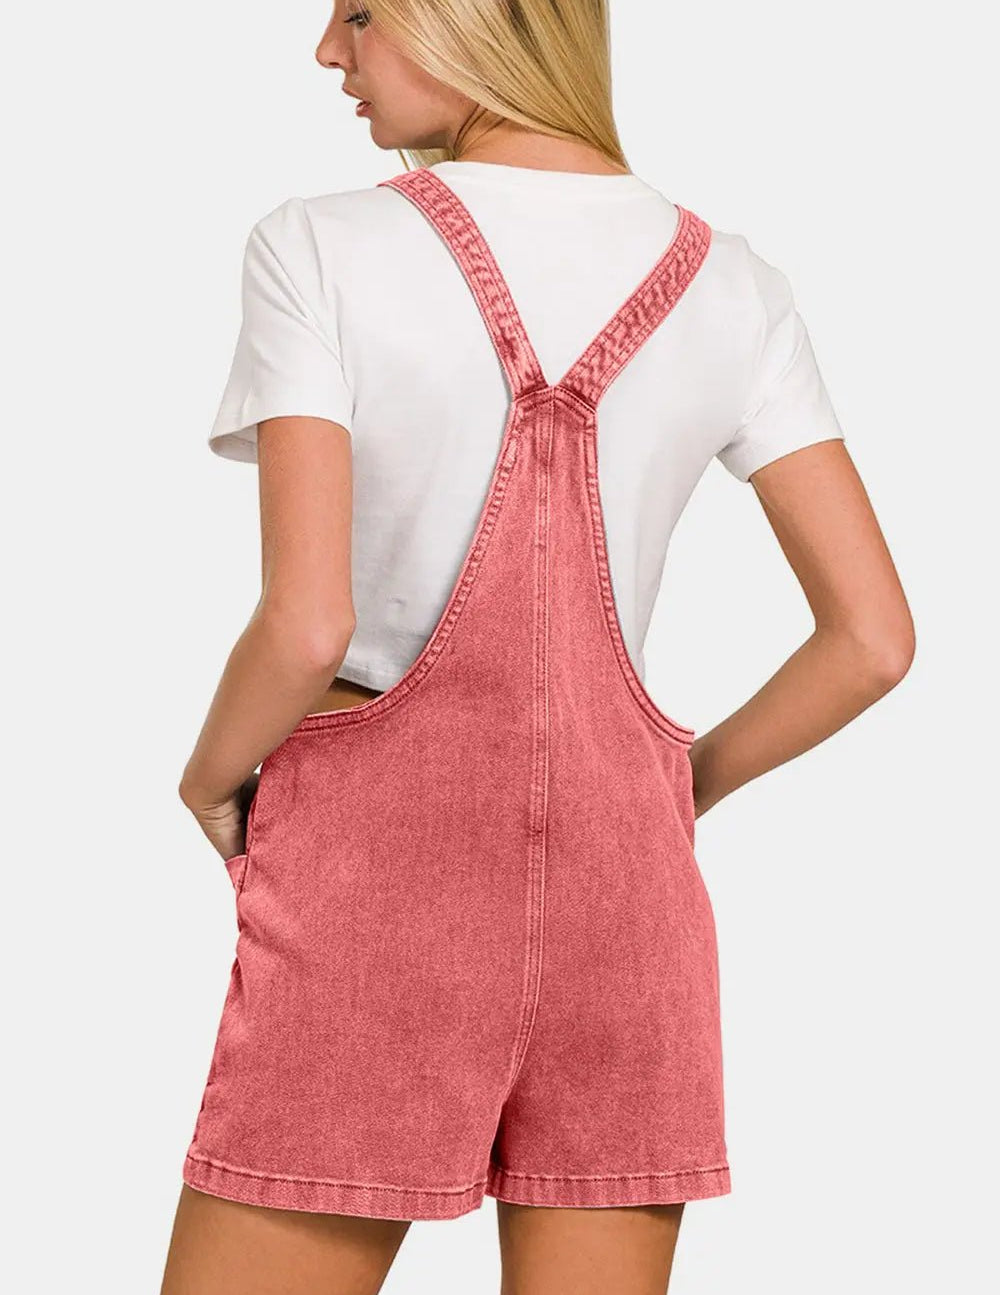 KNOT STRAP WASHED ROMPER SLEEVELESS PLAYSUITS - MeadeuxKNOT STRAP WASHED ROMPER SLEEVELESS PLAYSUITSRomperMeadeux